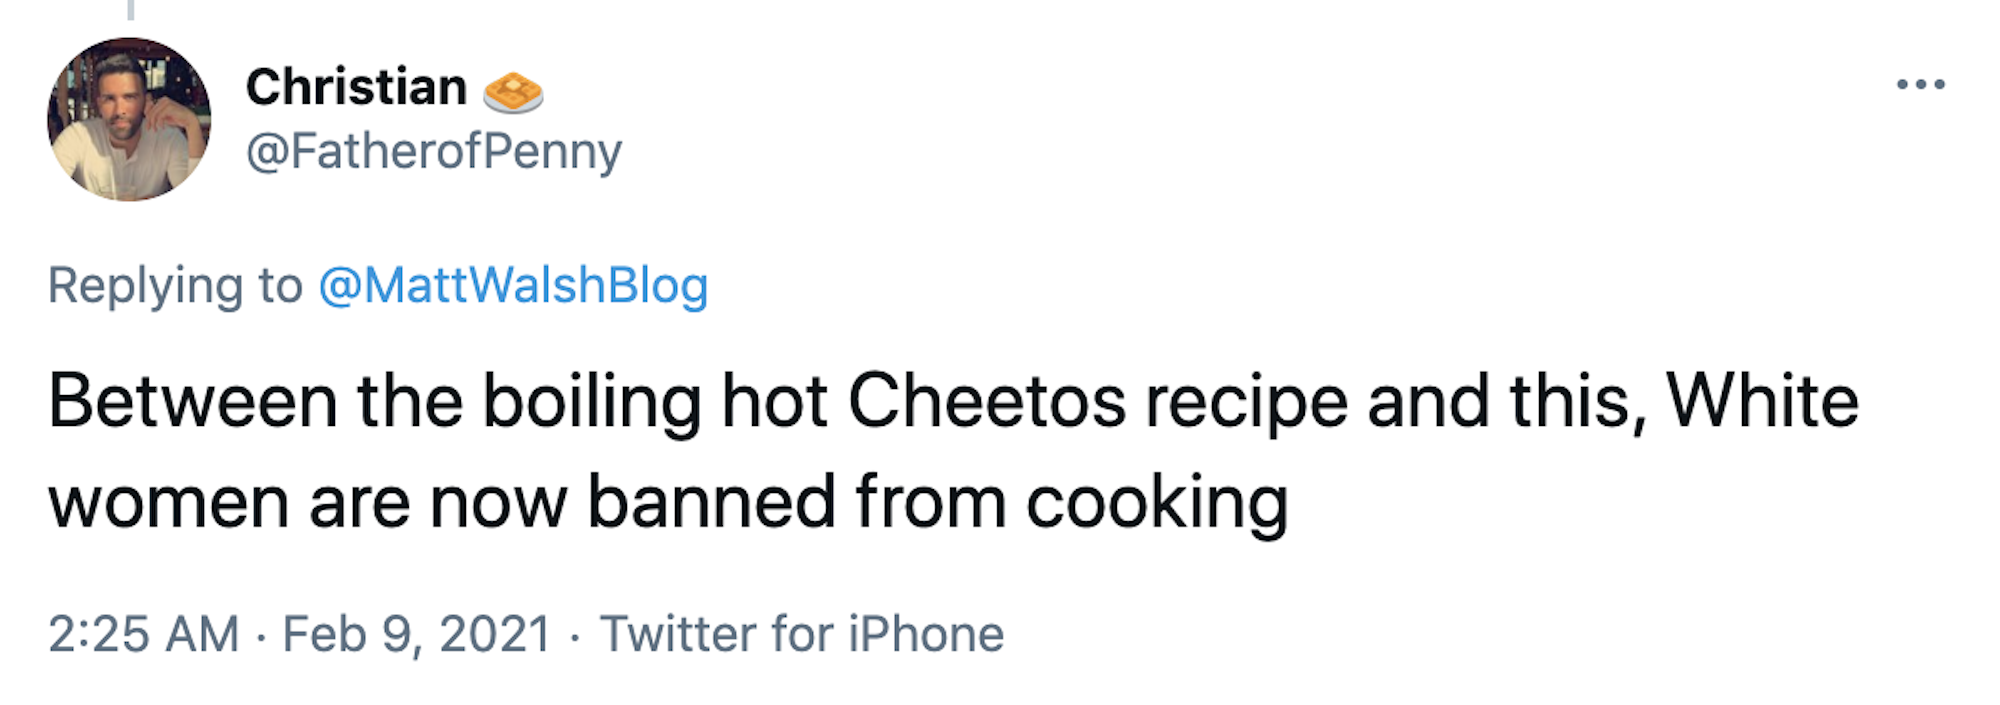 Between the boiling hot Cheetos recipe and this, White women are now banned from cooking